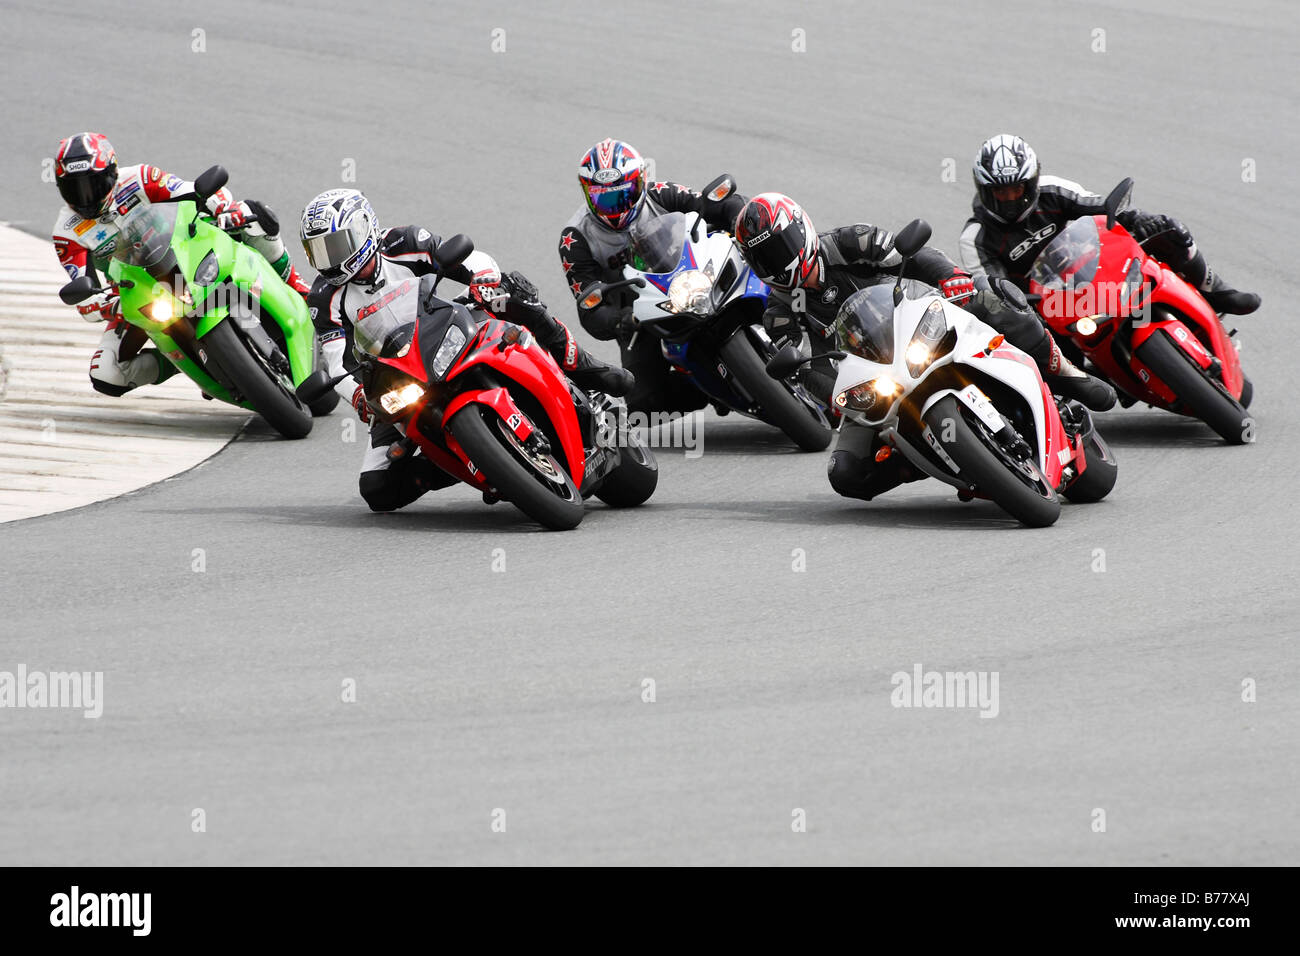 Motorcycles on a racing course Stock Photo